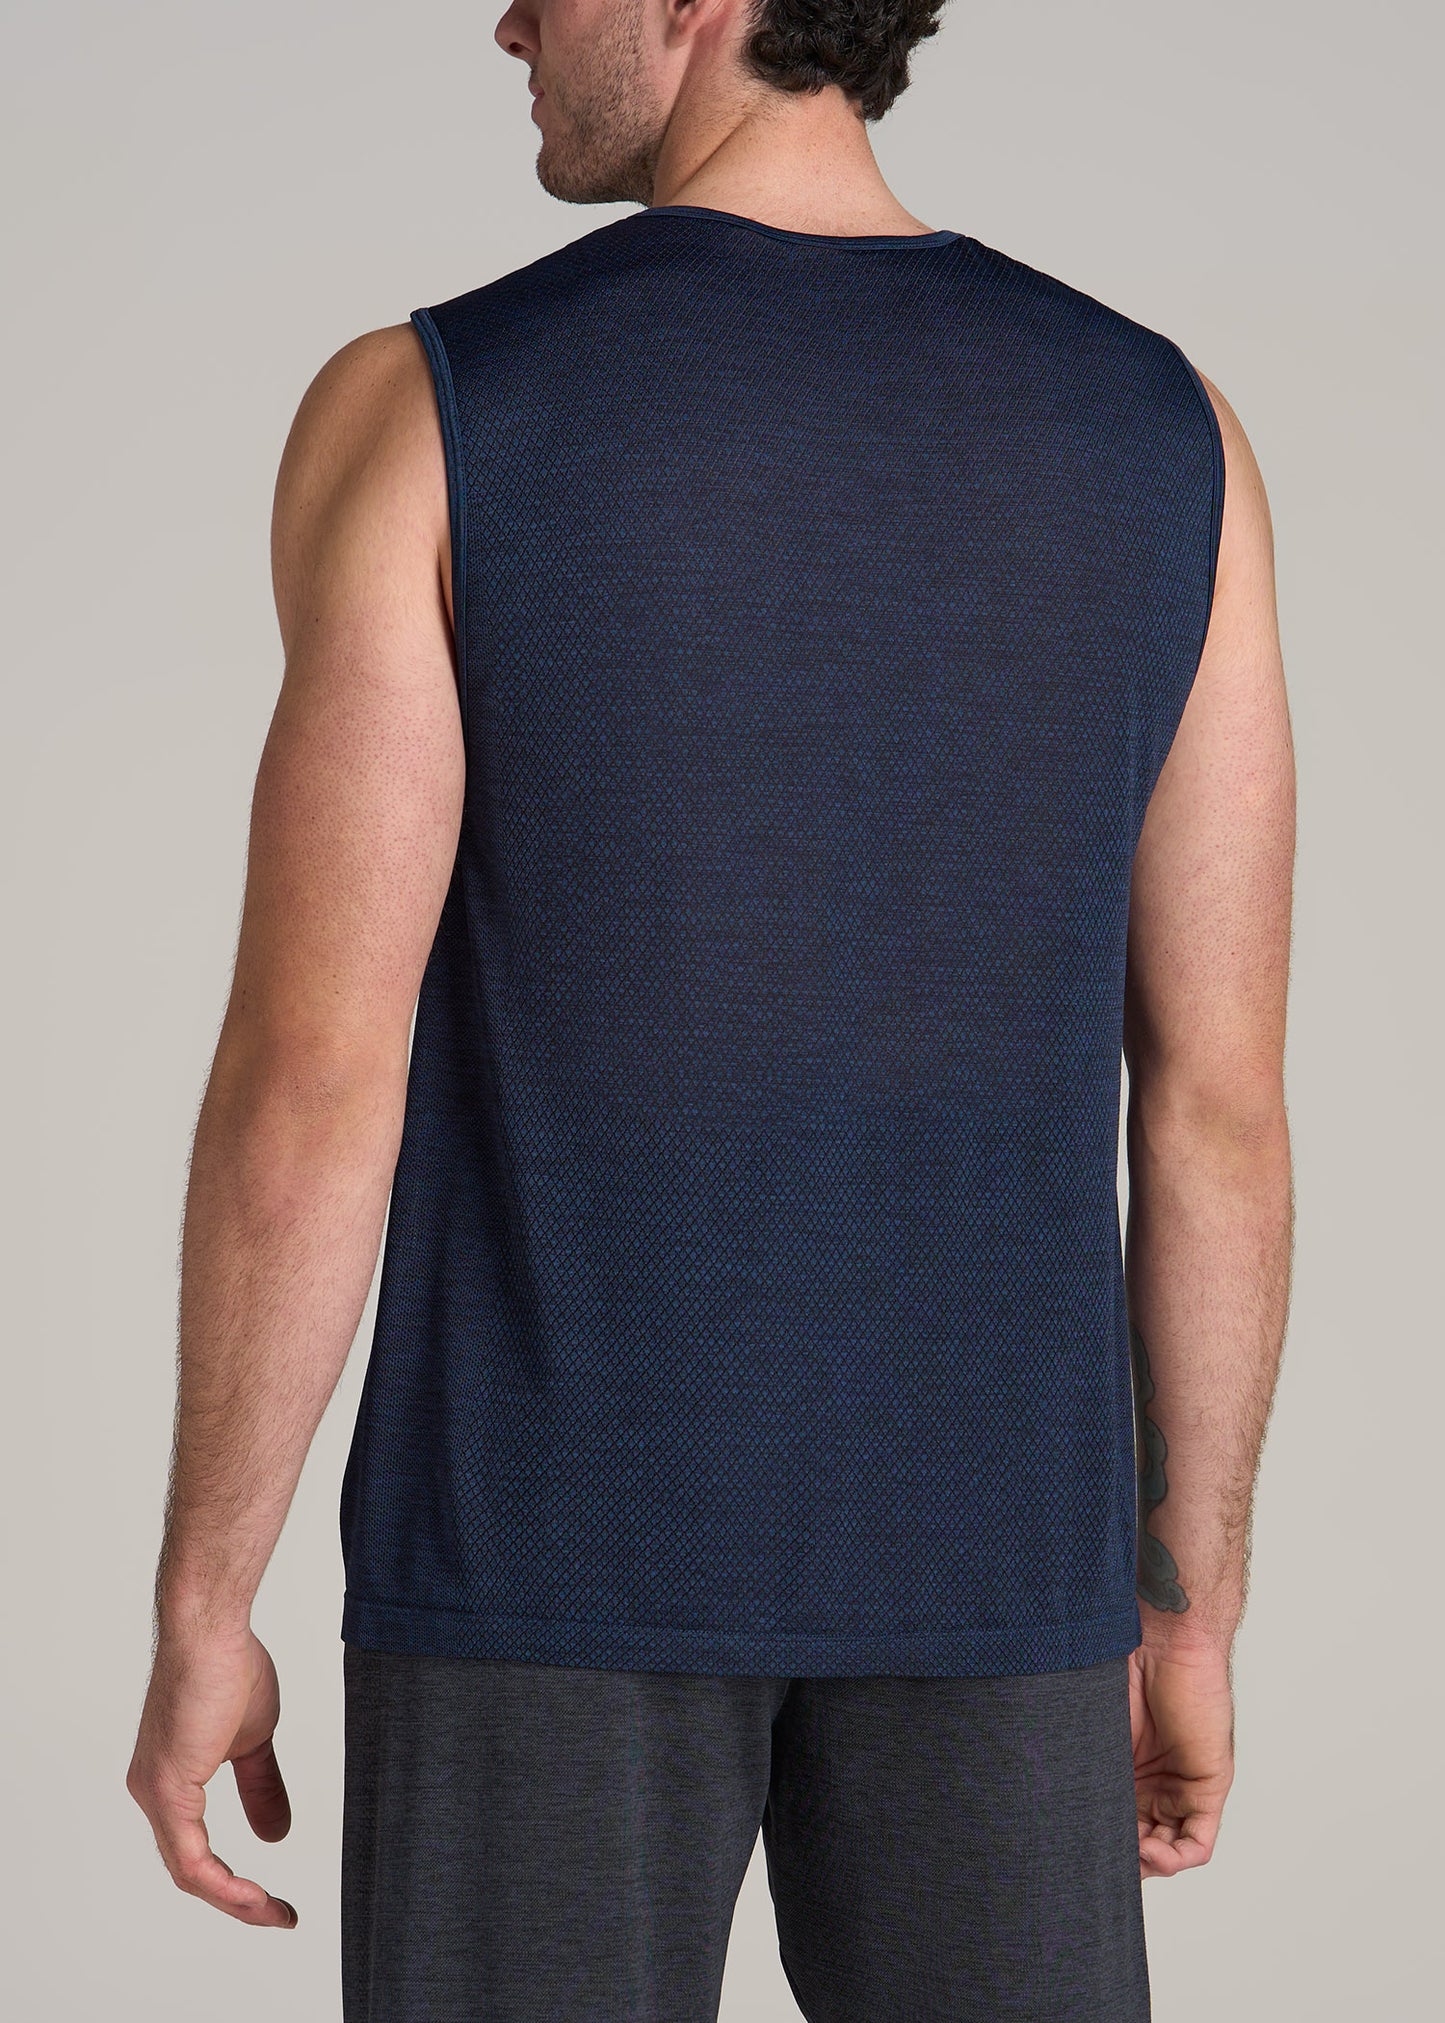 A.T. Performance Engineered Tall Tank Top in Navy Mix